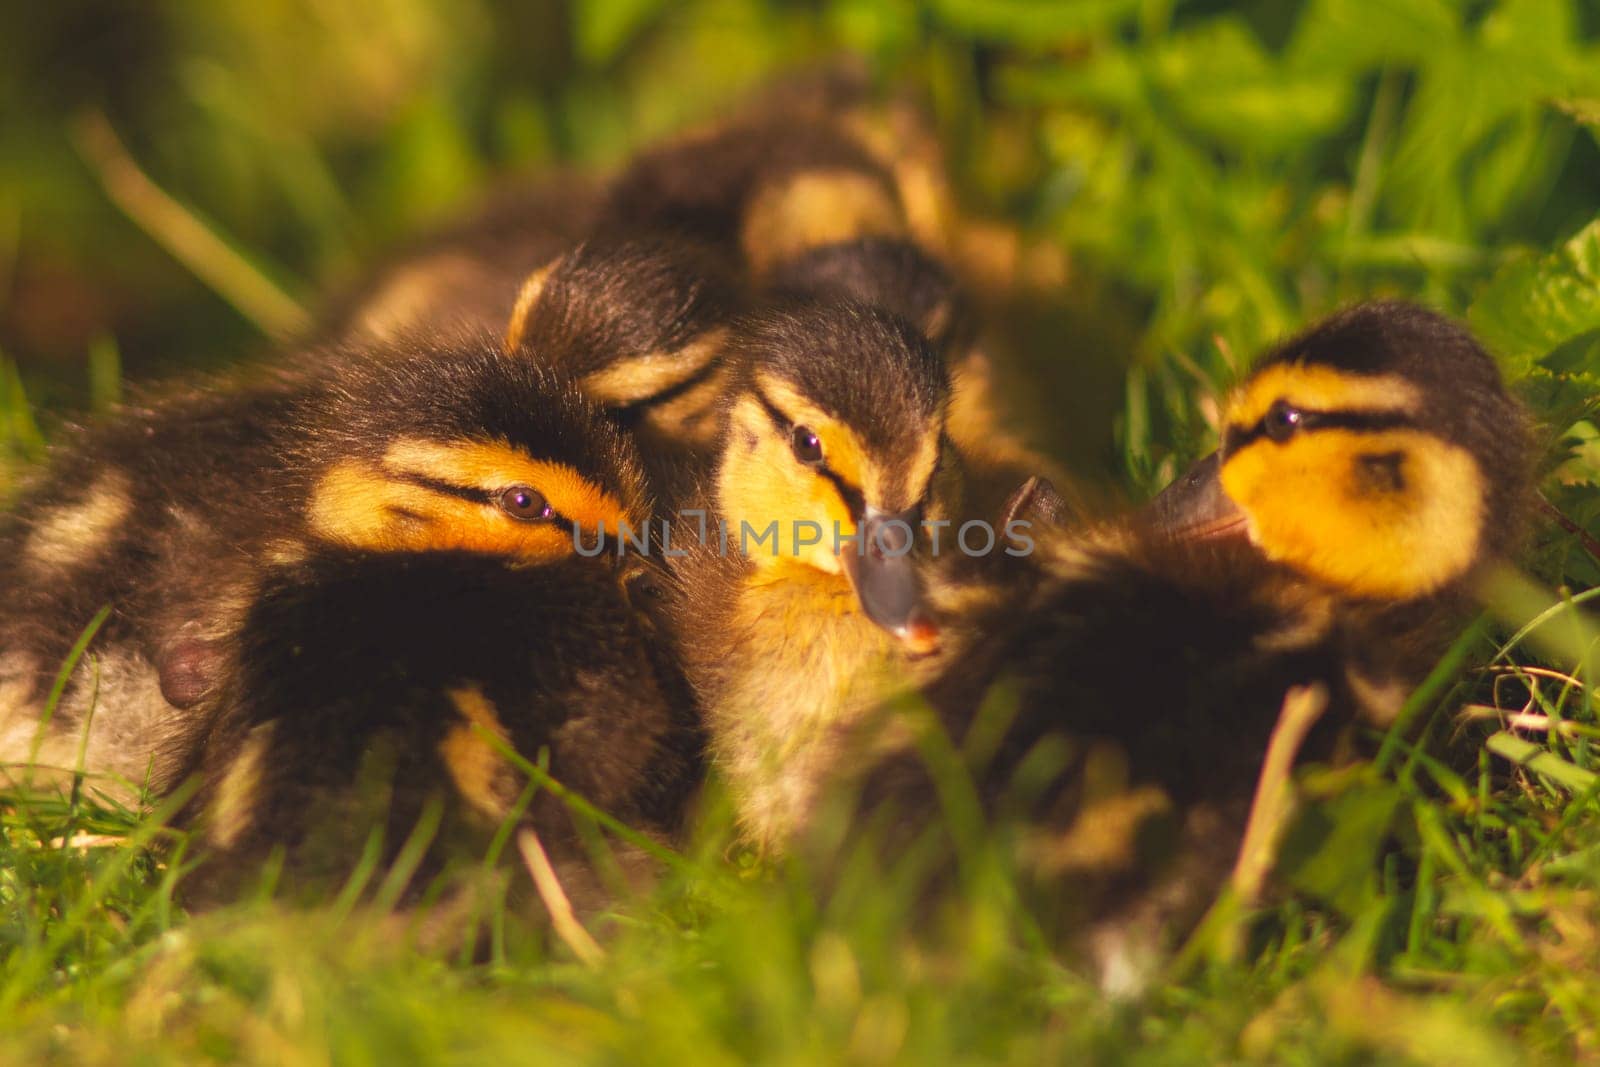 fluffy and small ducklings resting lying next to each other, wild nature